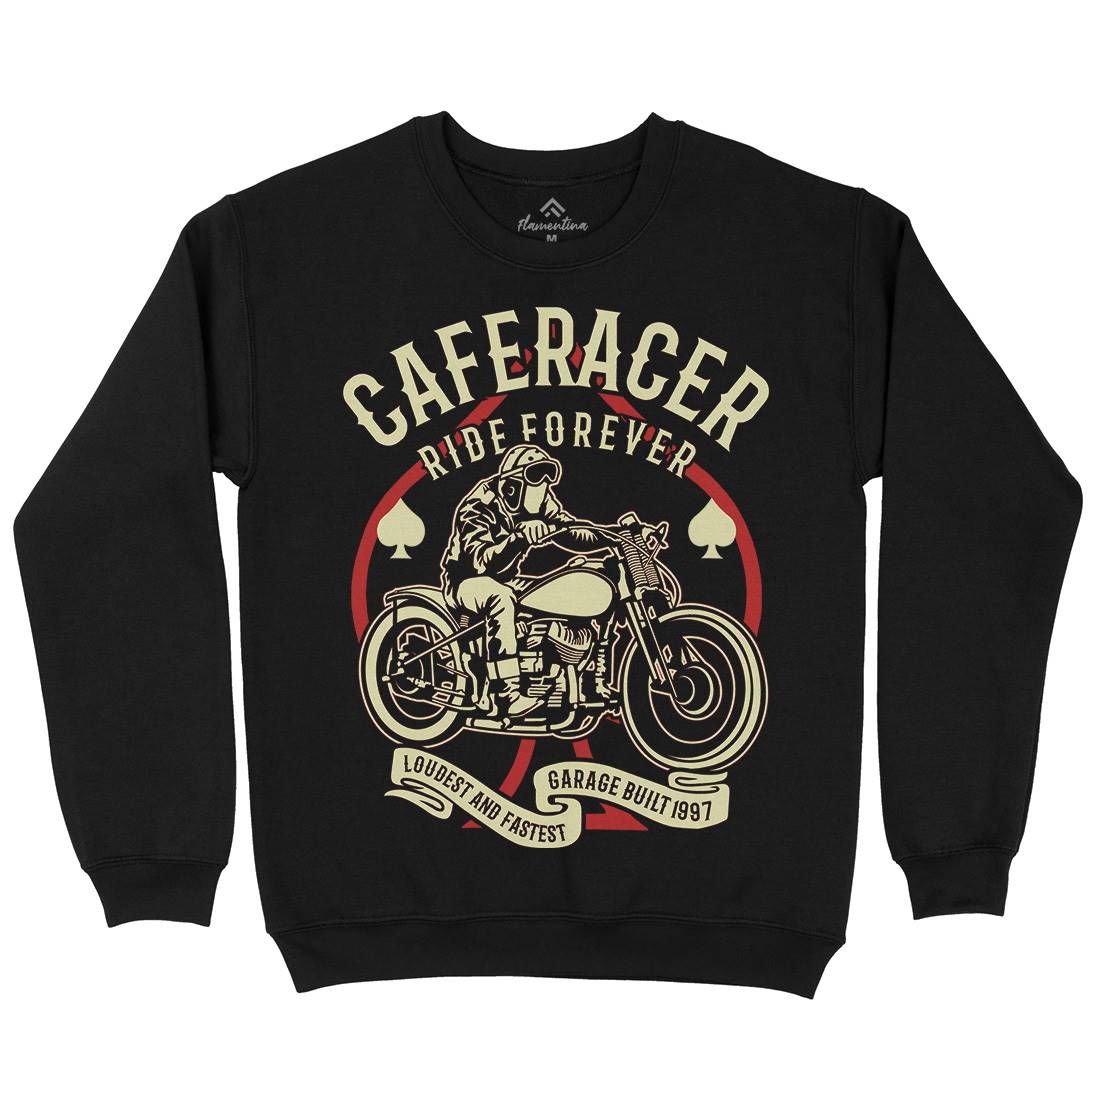 Caferacer Ride Forever Kids Crew Neck Sweatshirt Motorcycles B192